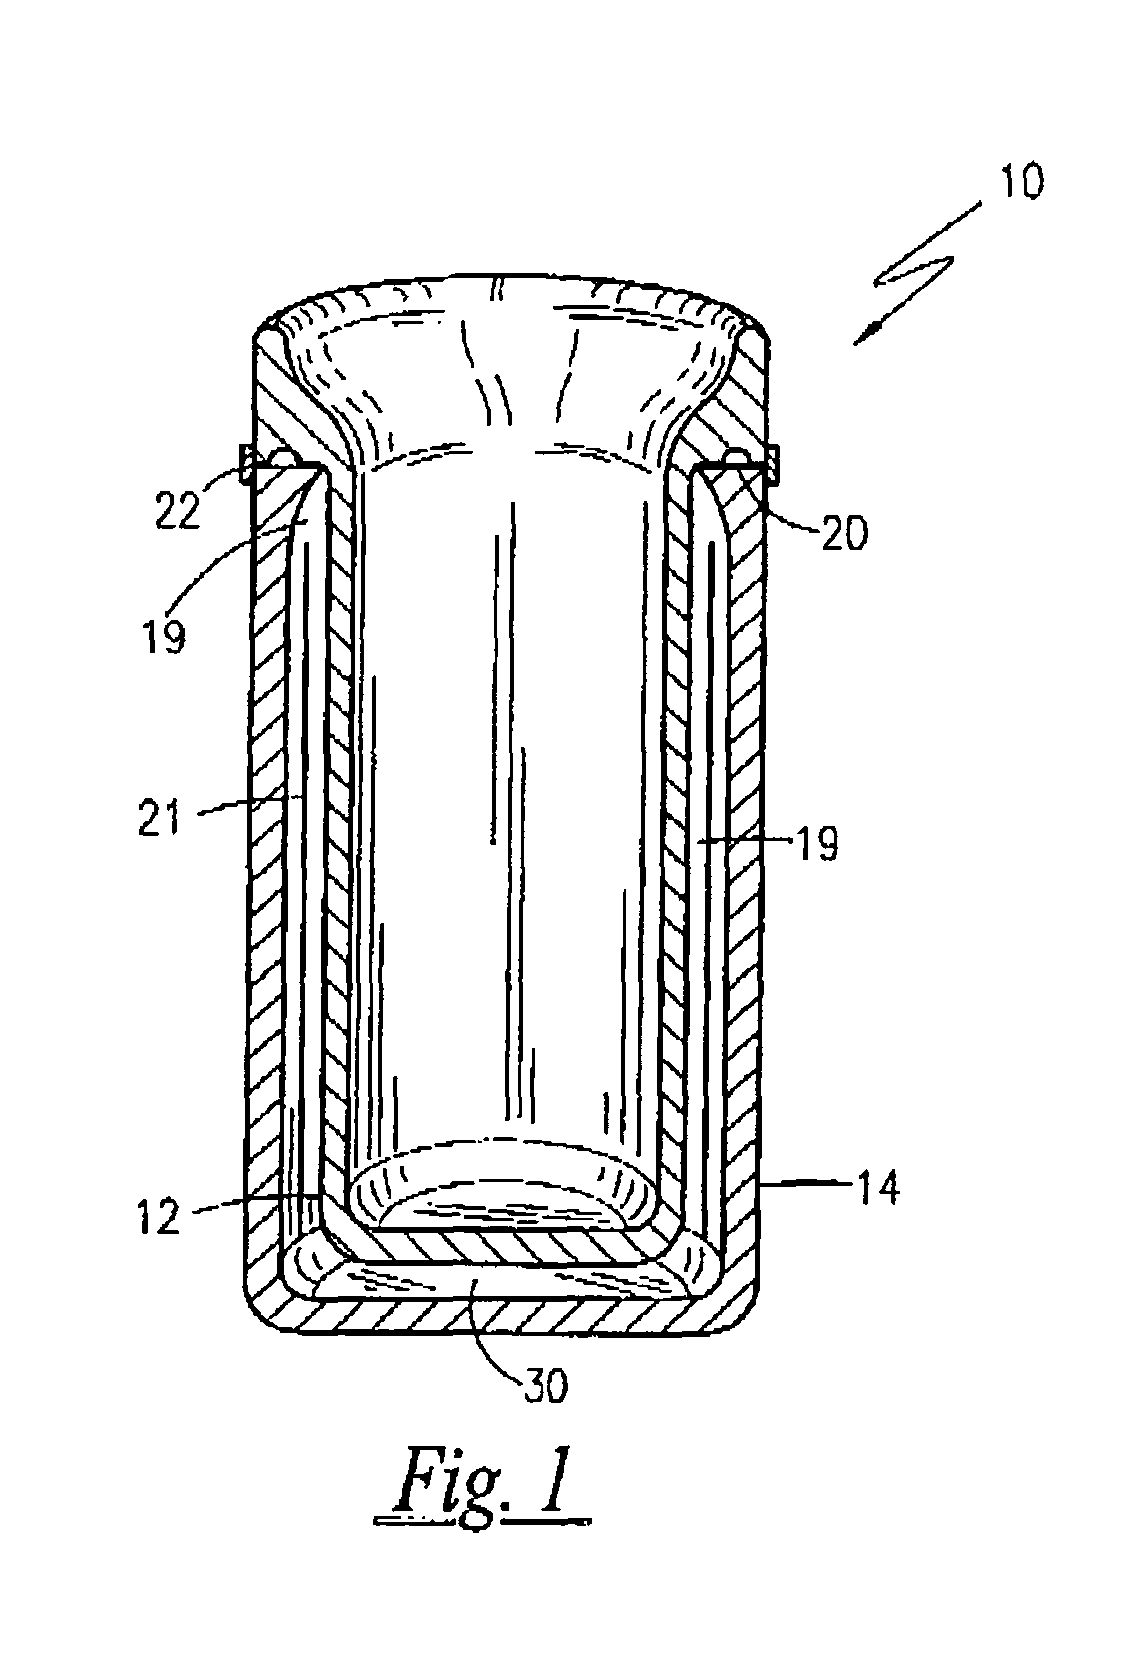 Method for manufacturing a thermally insulated drinking glass or glass bottle